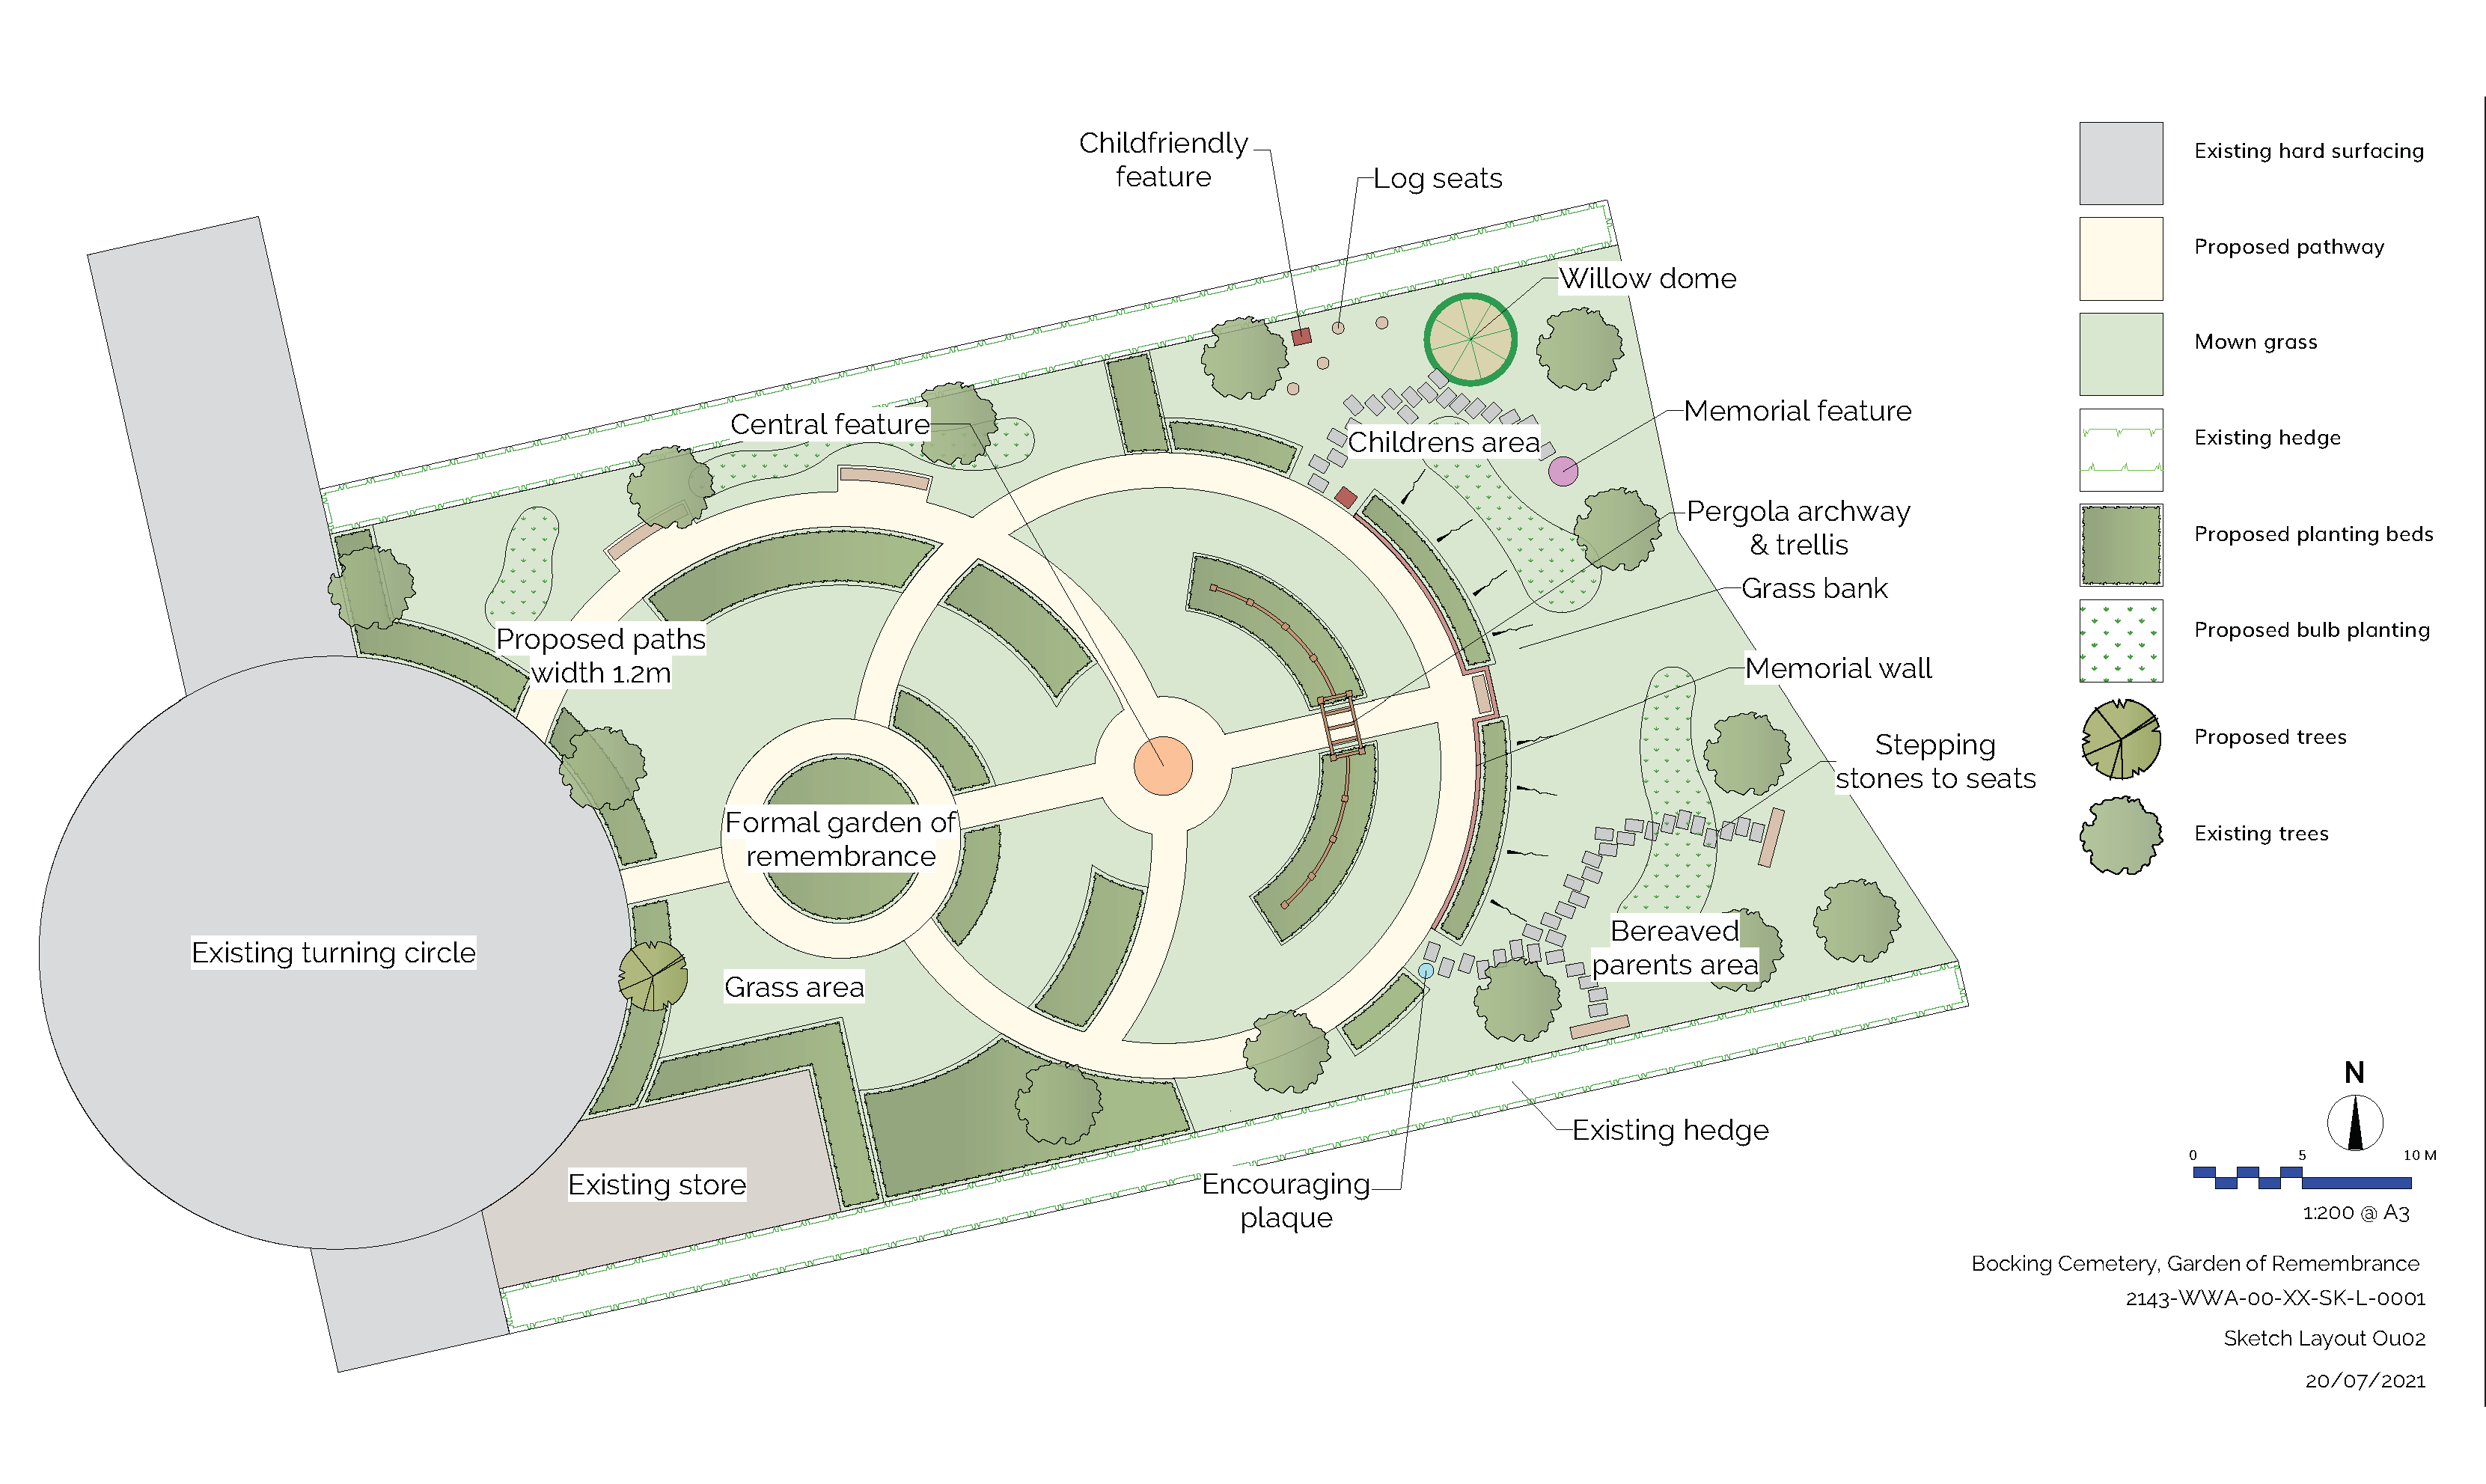 Proposed new memorial garden in Bocking cemetery, featuring children’s area, log seats, willow dome, memorial feature, pergola archway, grass bank, memorial wall, stepping stone to seats, bereaved parents area, existing hedge, encouraging plaque, existing store, grass area, formal garden of remembrance, proposed paths, central feature and existing turning circle.